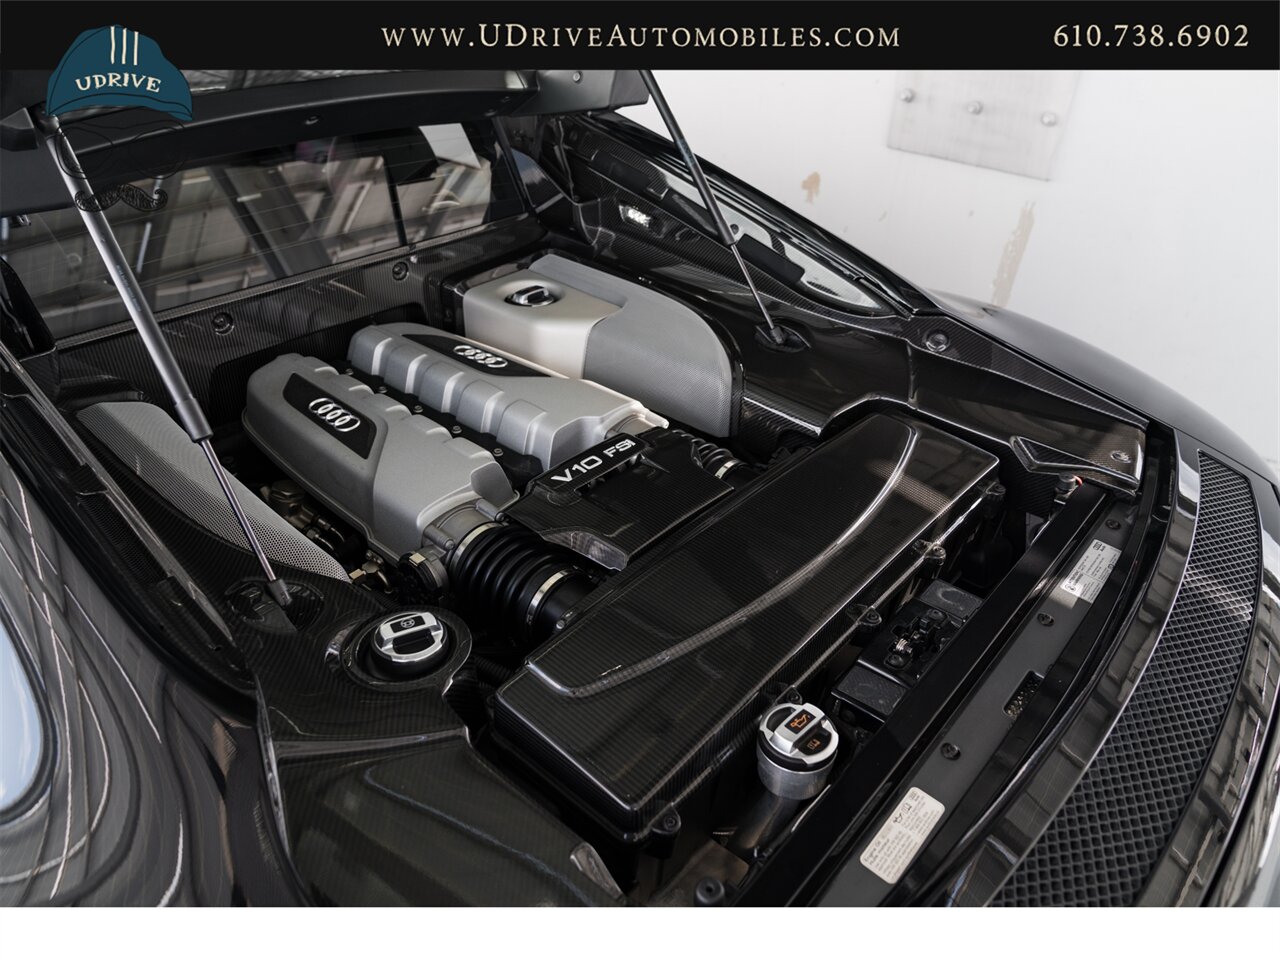 2011 Audi R8 5.2 Quattro  V10 6 Speed Manual - Photo 44 - West Chester, PA 19382